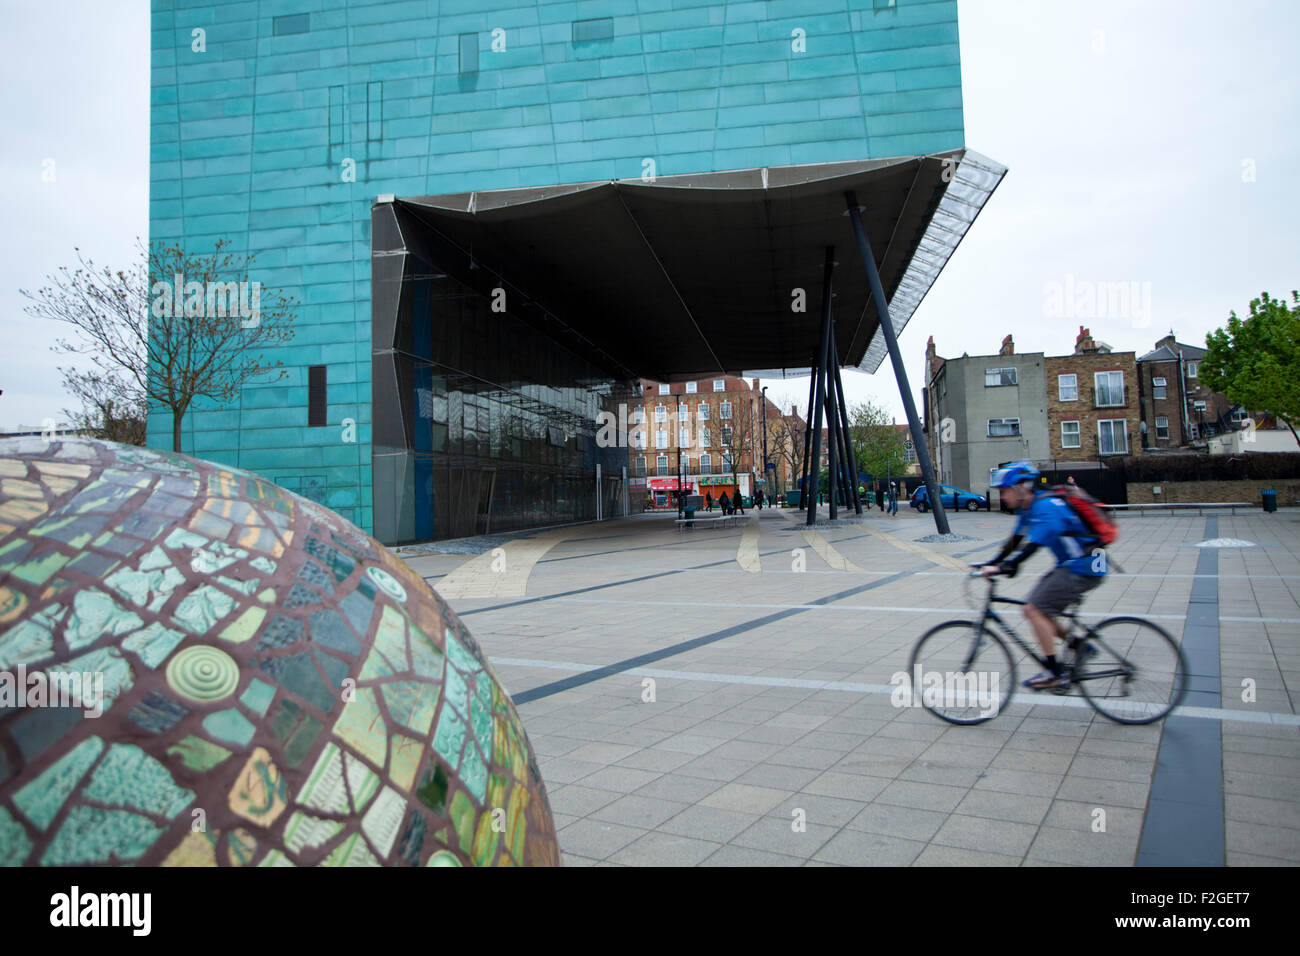 A view of Peckham Square with Peckham library and a cyclist. Stock Photo